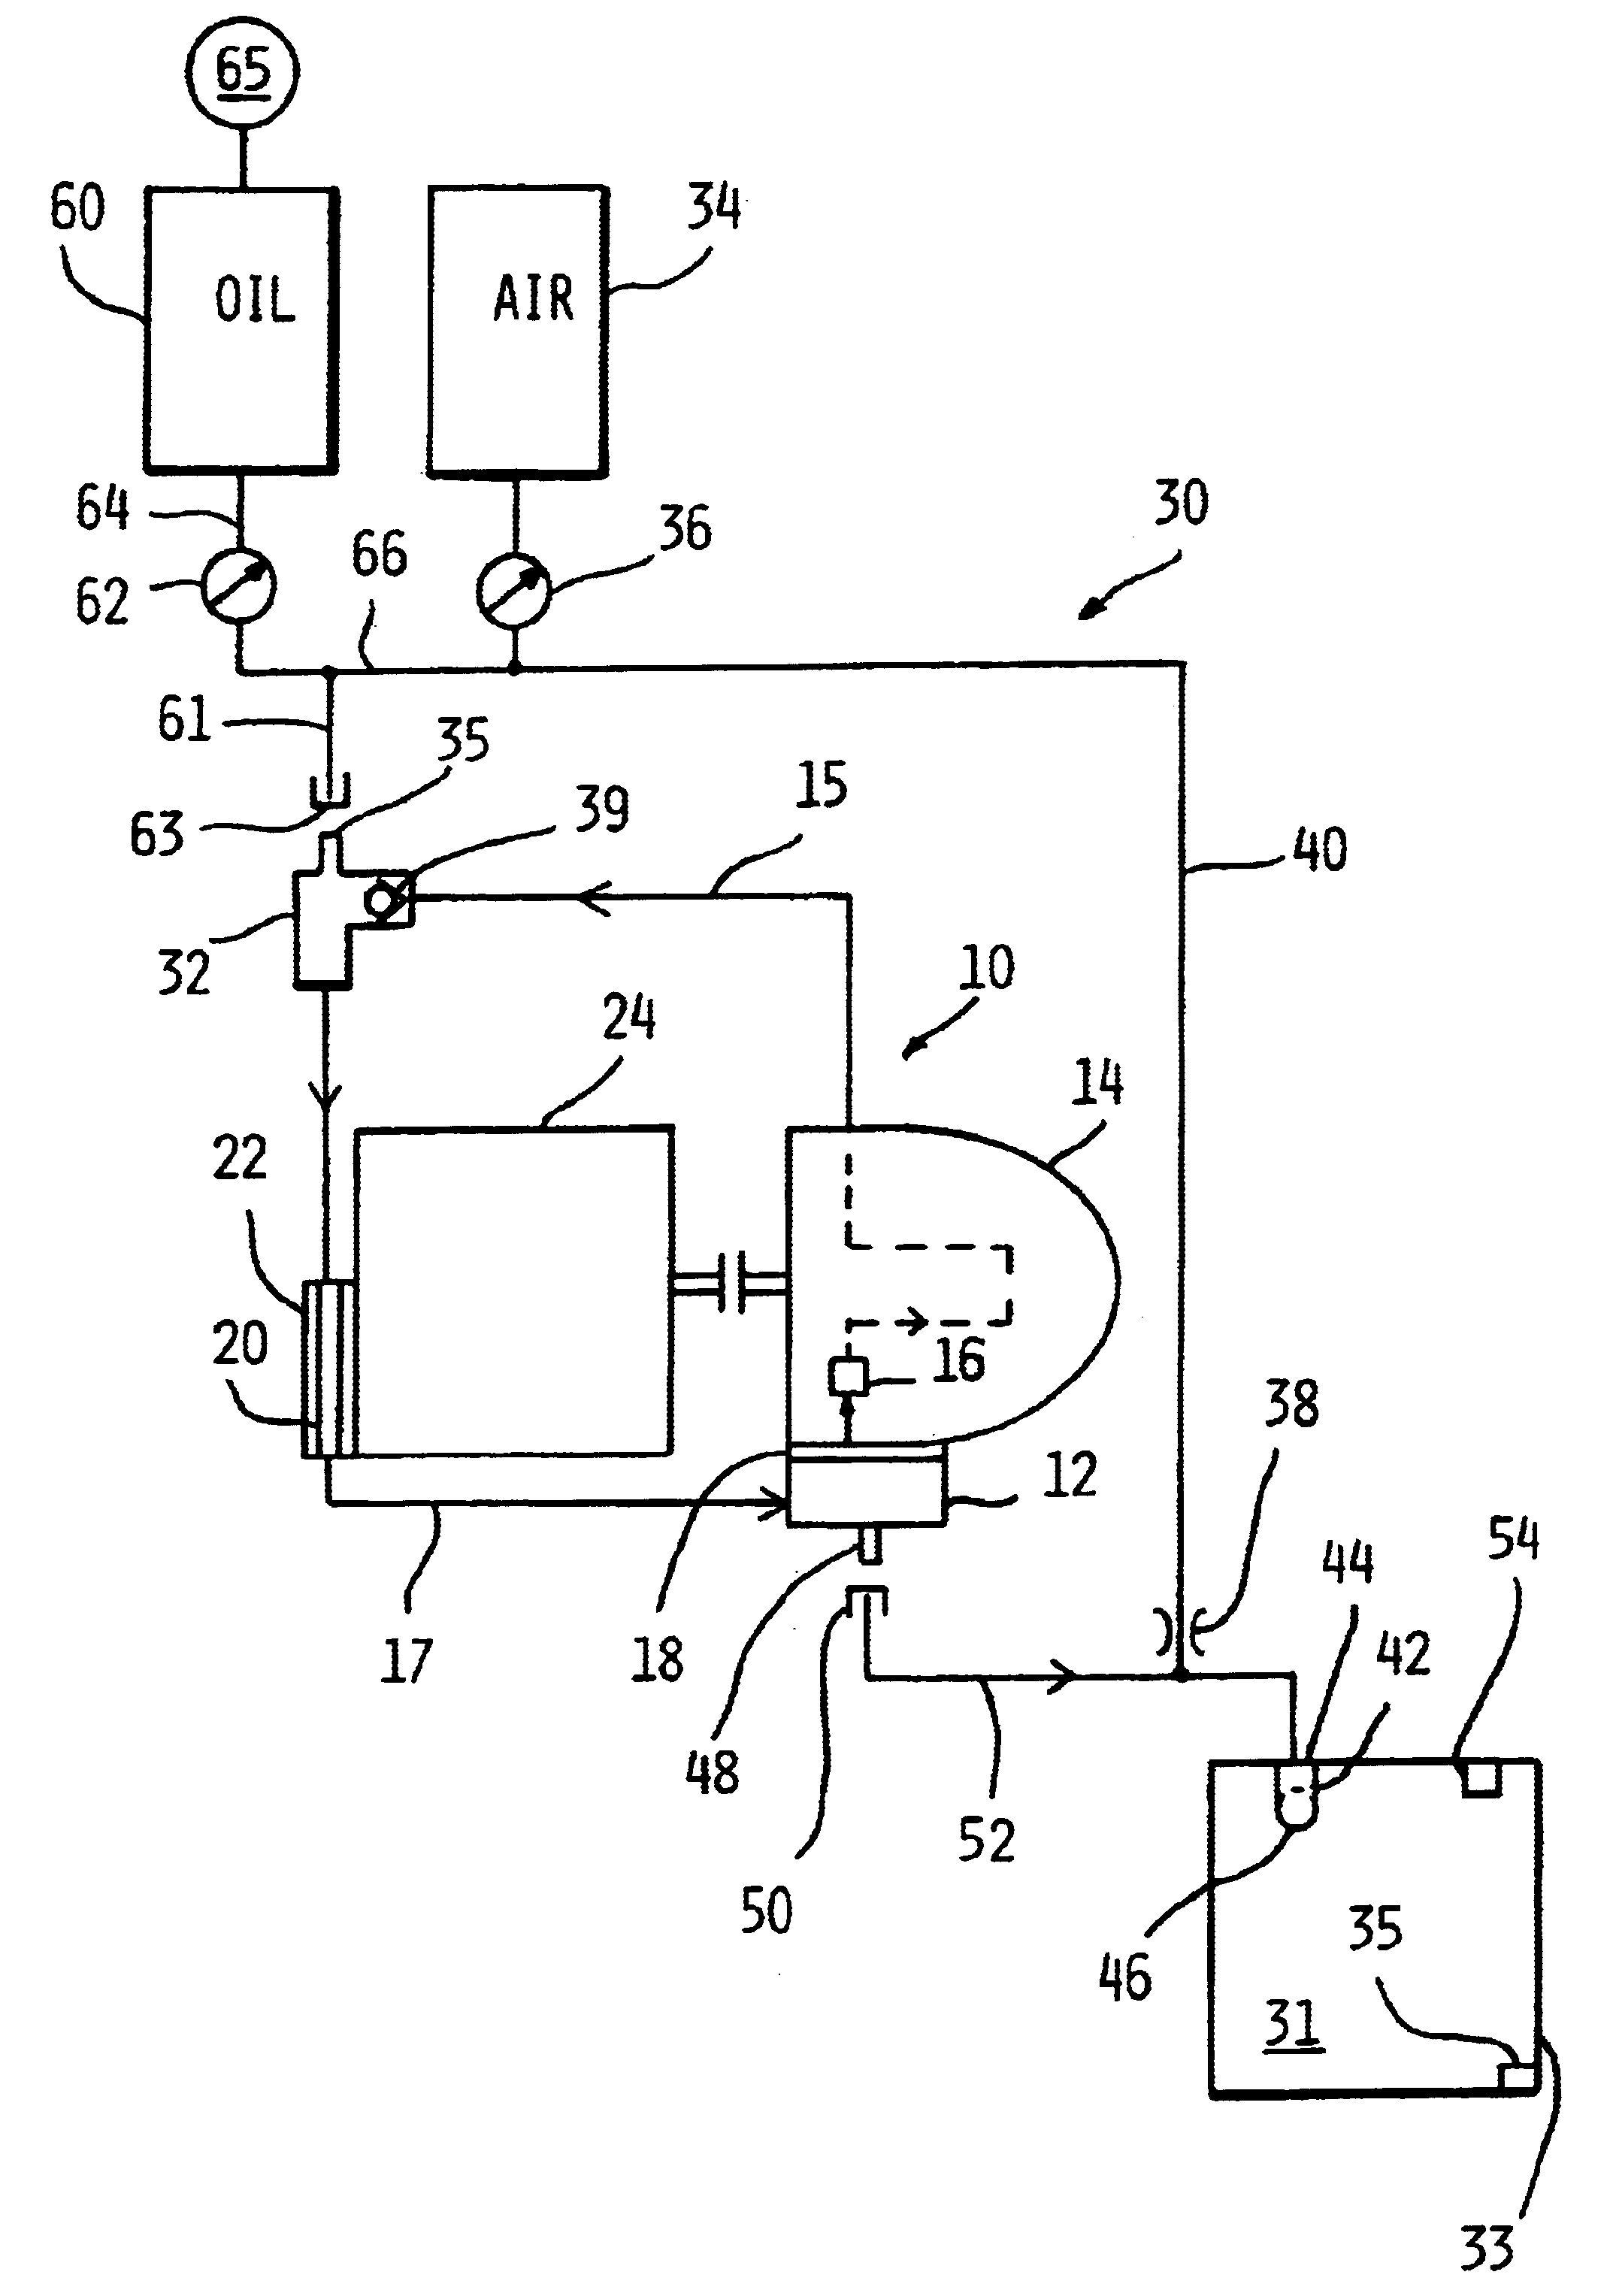 Method and apparatus for removing transmission fluid from fluid reservoir and associated fluid cooler with optional fluid replacement